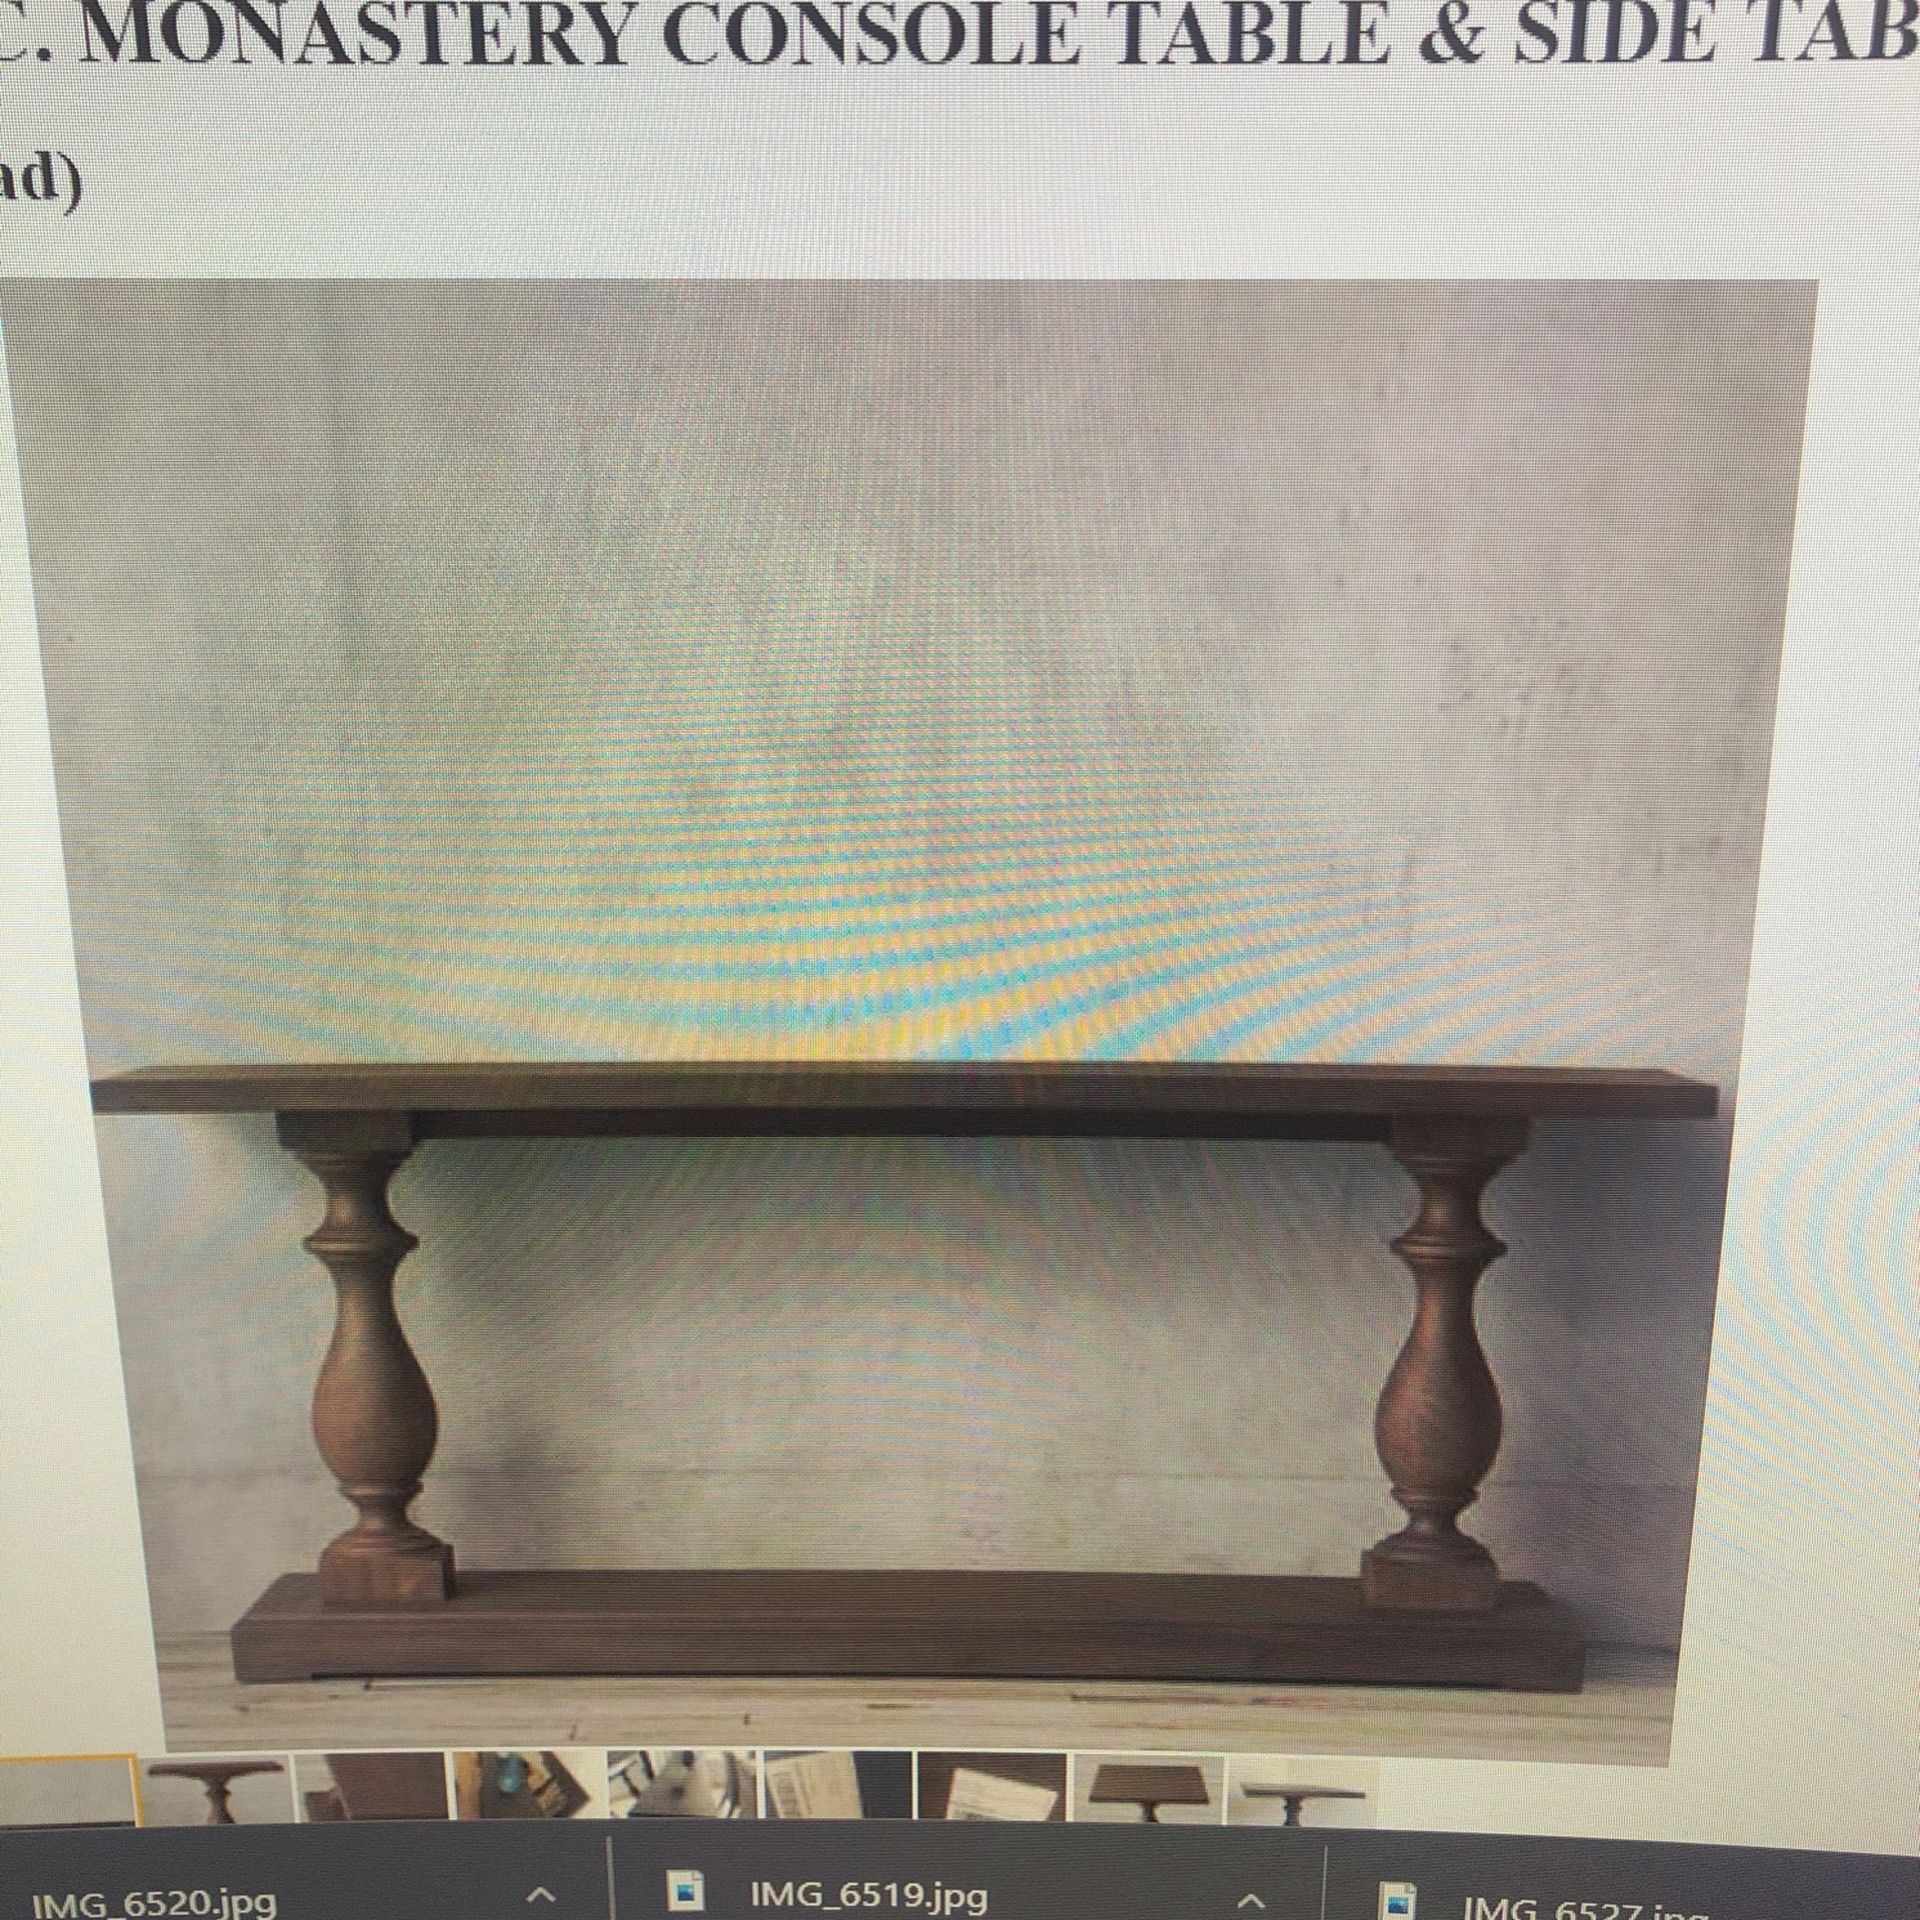 Restoration Hardware Console & Side Table 17th C. Monastery 